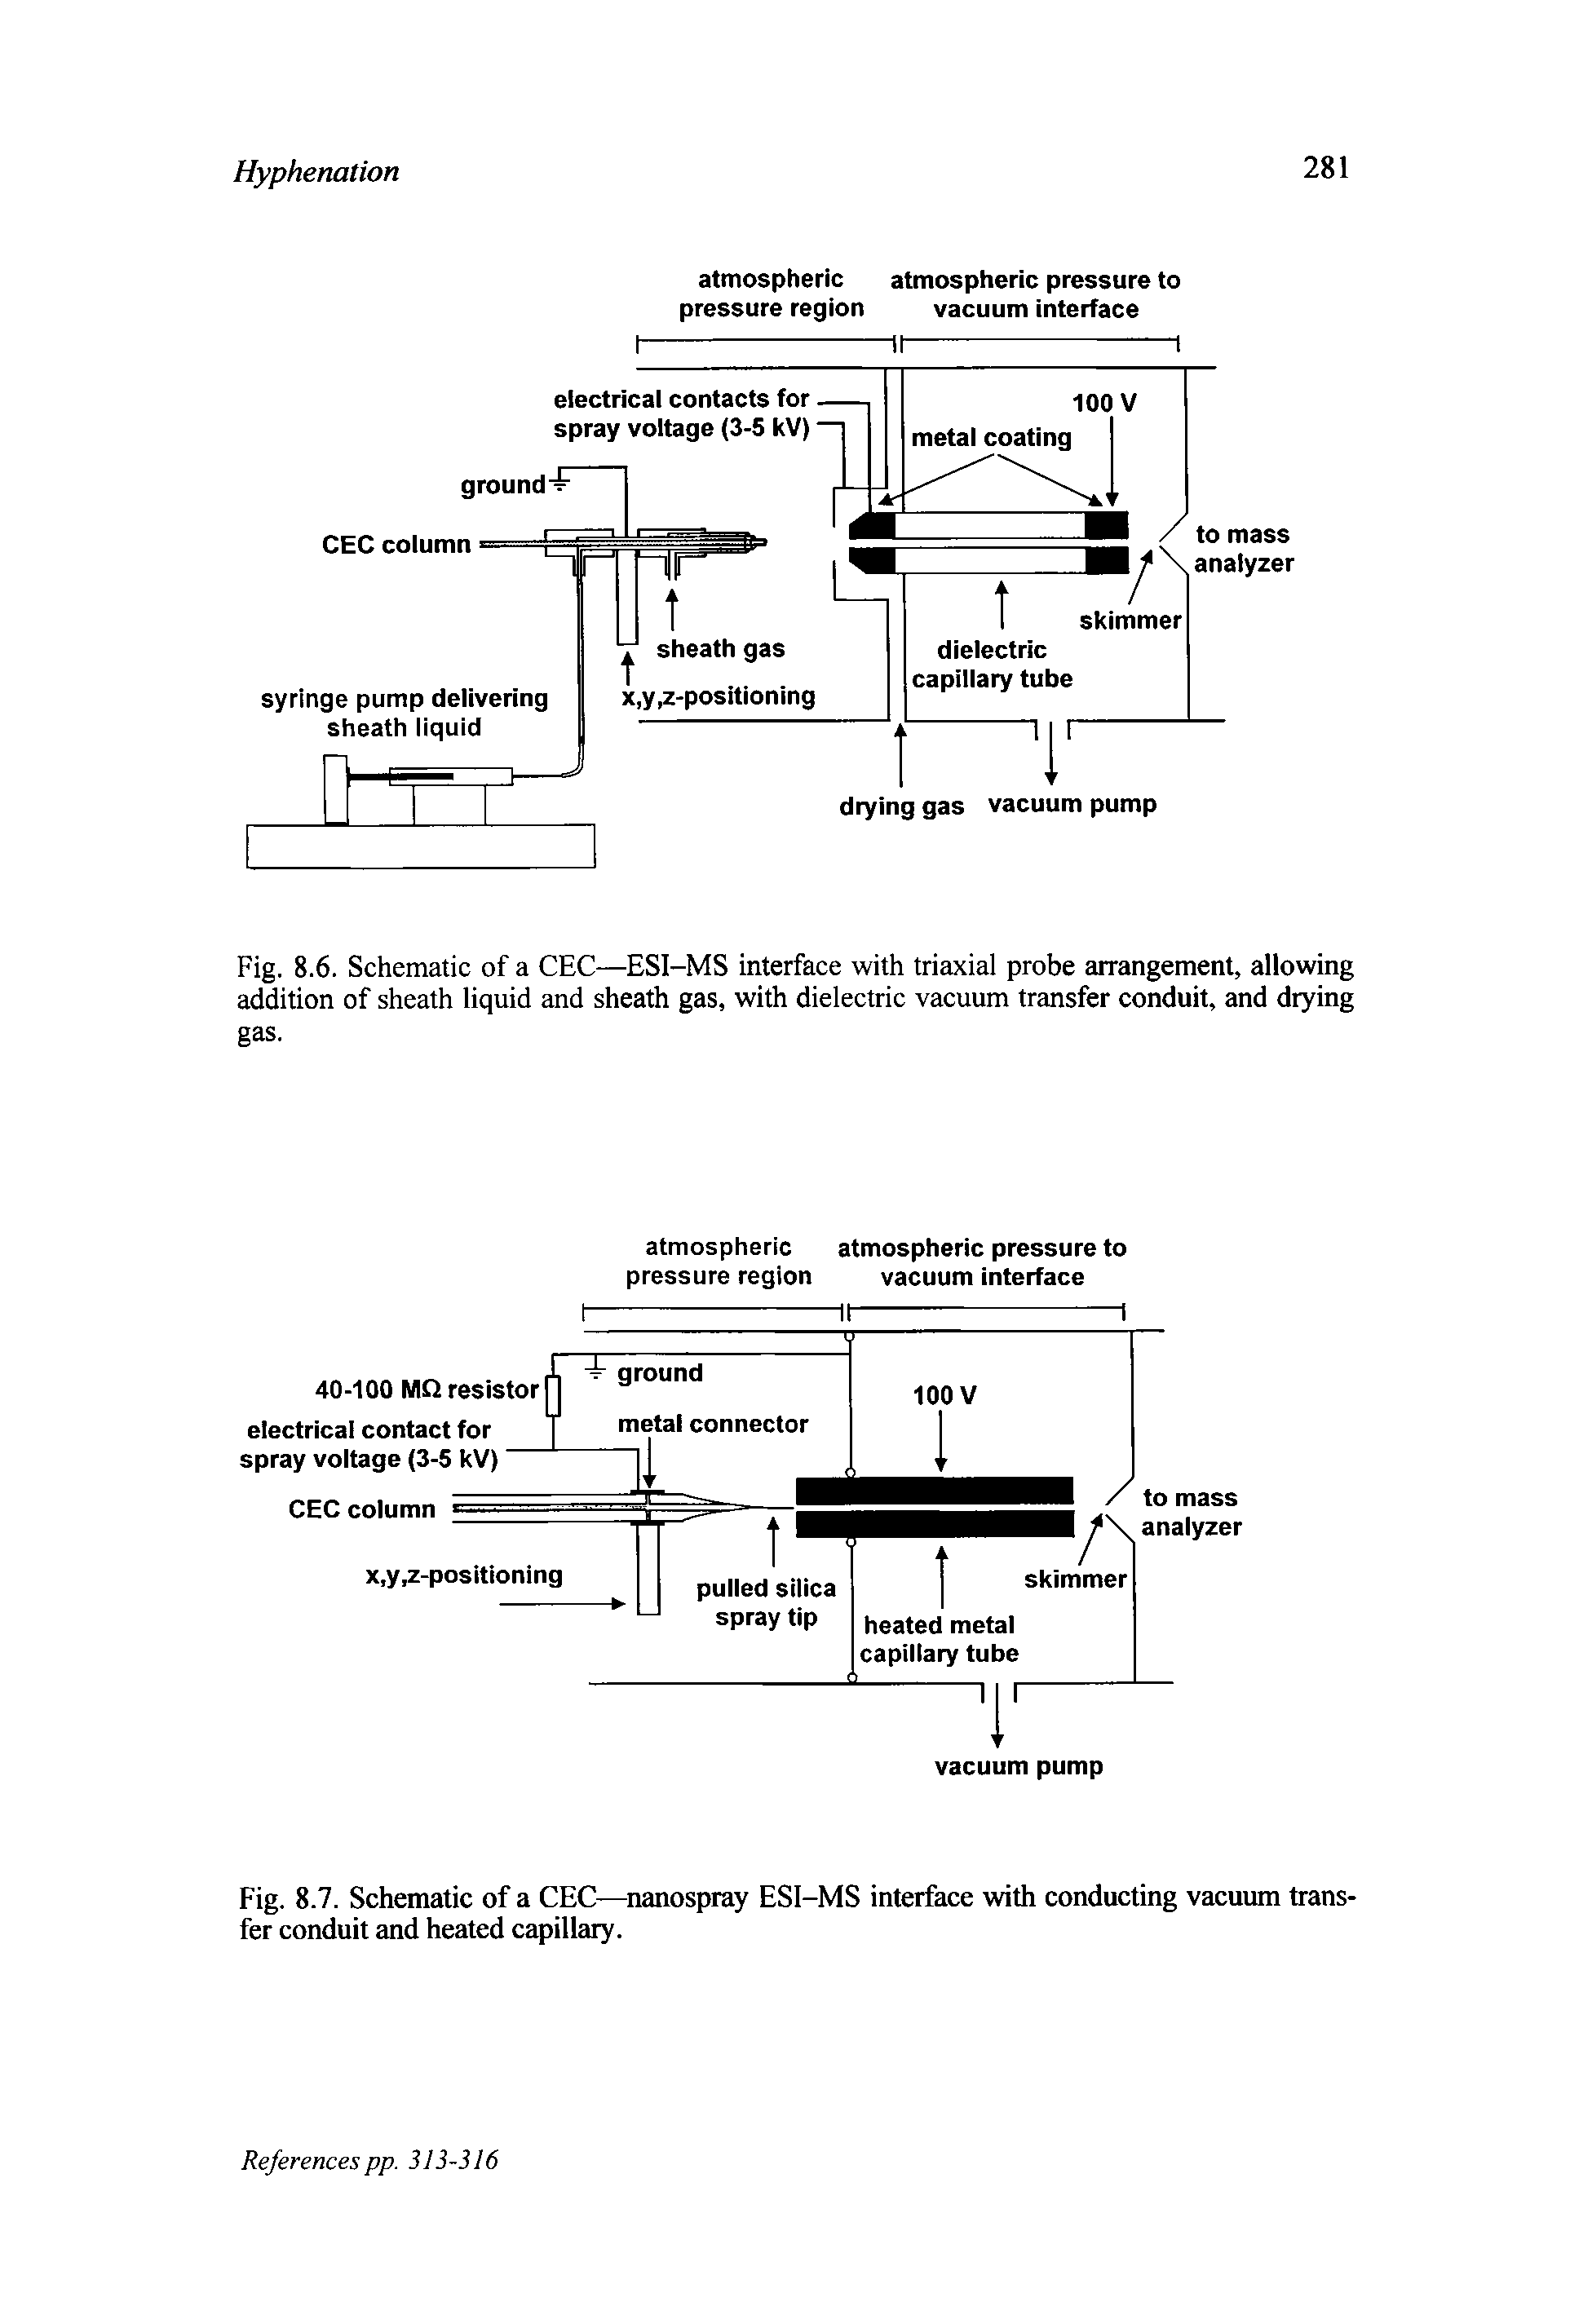 Fig. 8.6. Schematic of a CEC—ESI-MS interface with triaxial probe arrangement, allowing addition of sheath liquid and sheath gas, with dielectric vacuum transfer conduit, and dtying gas.